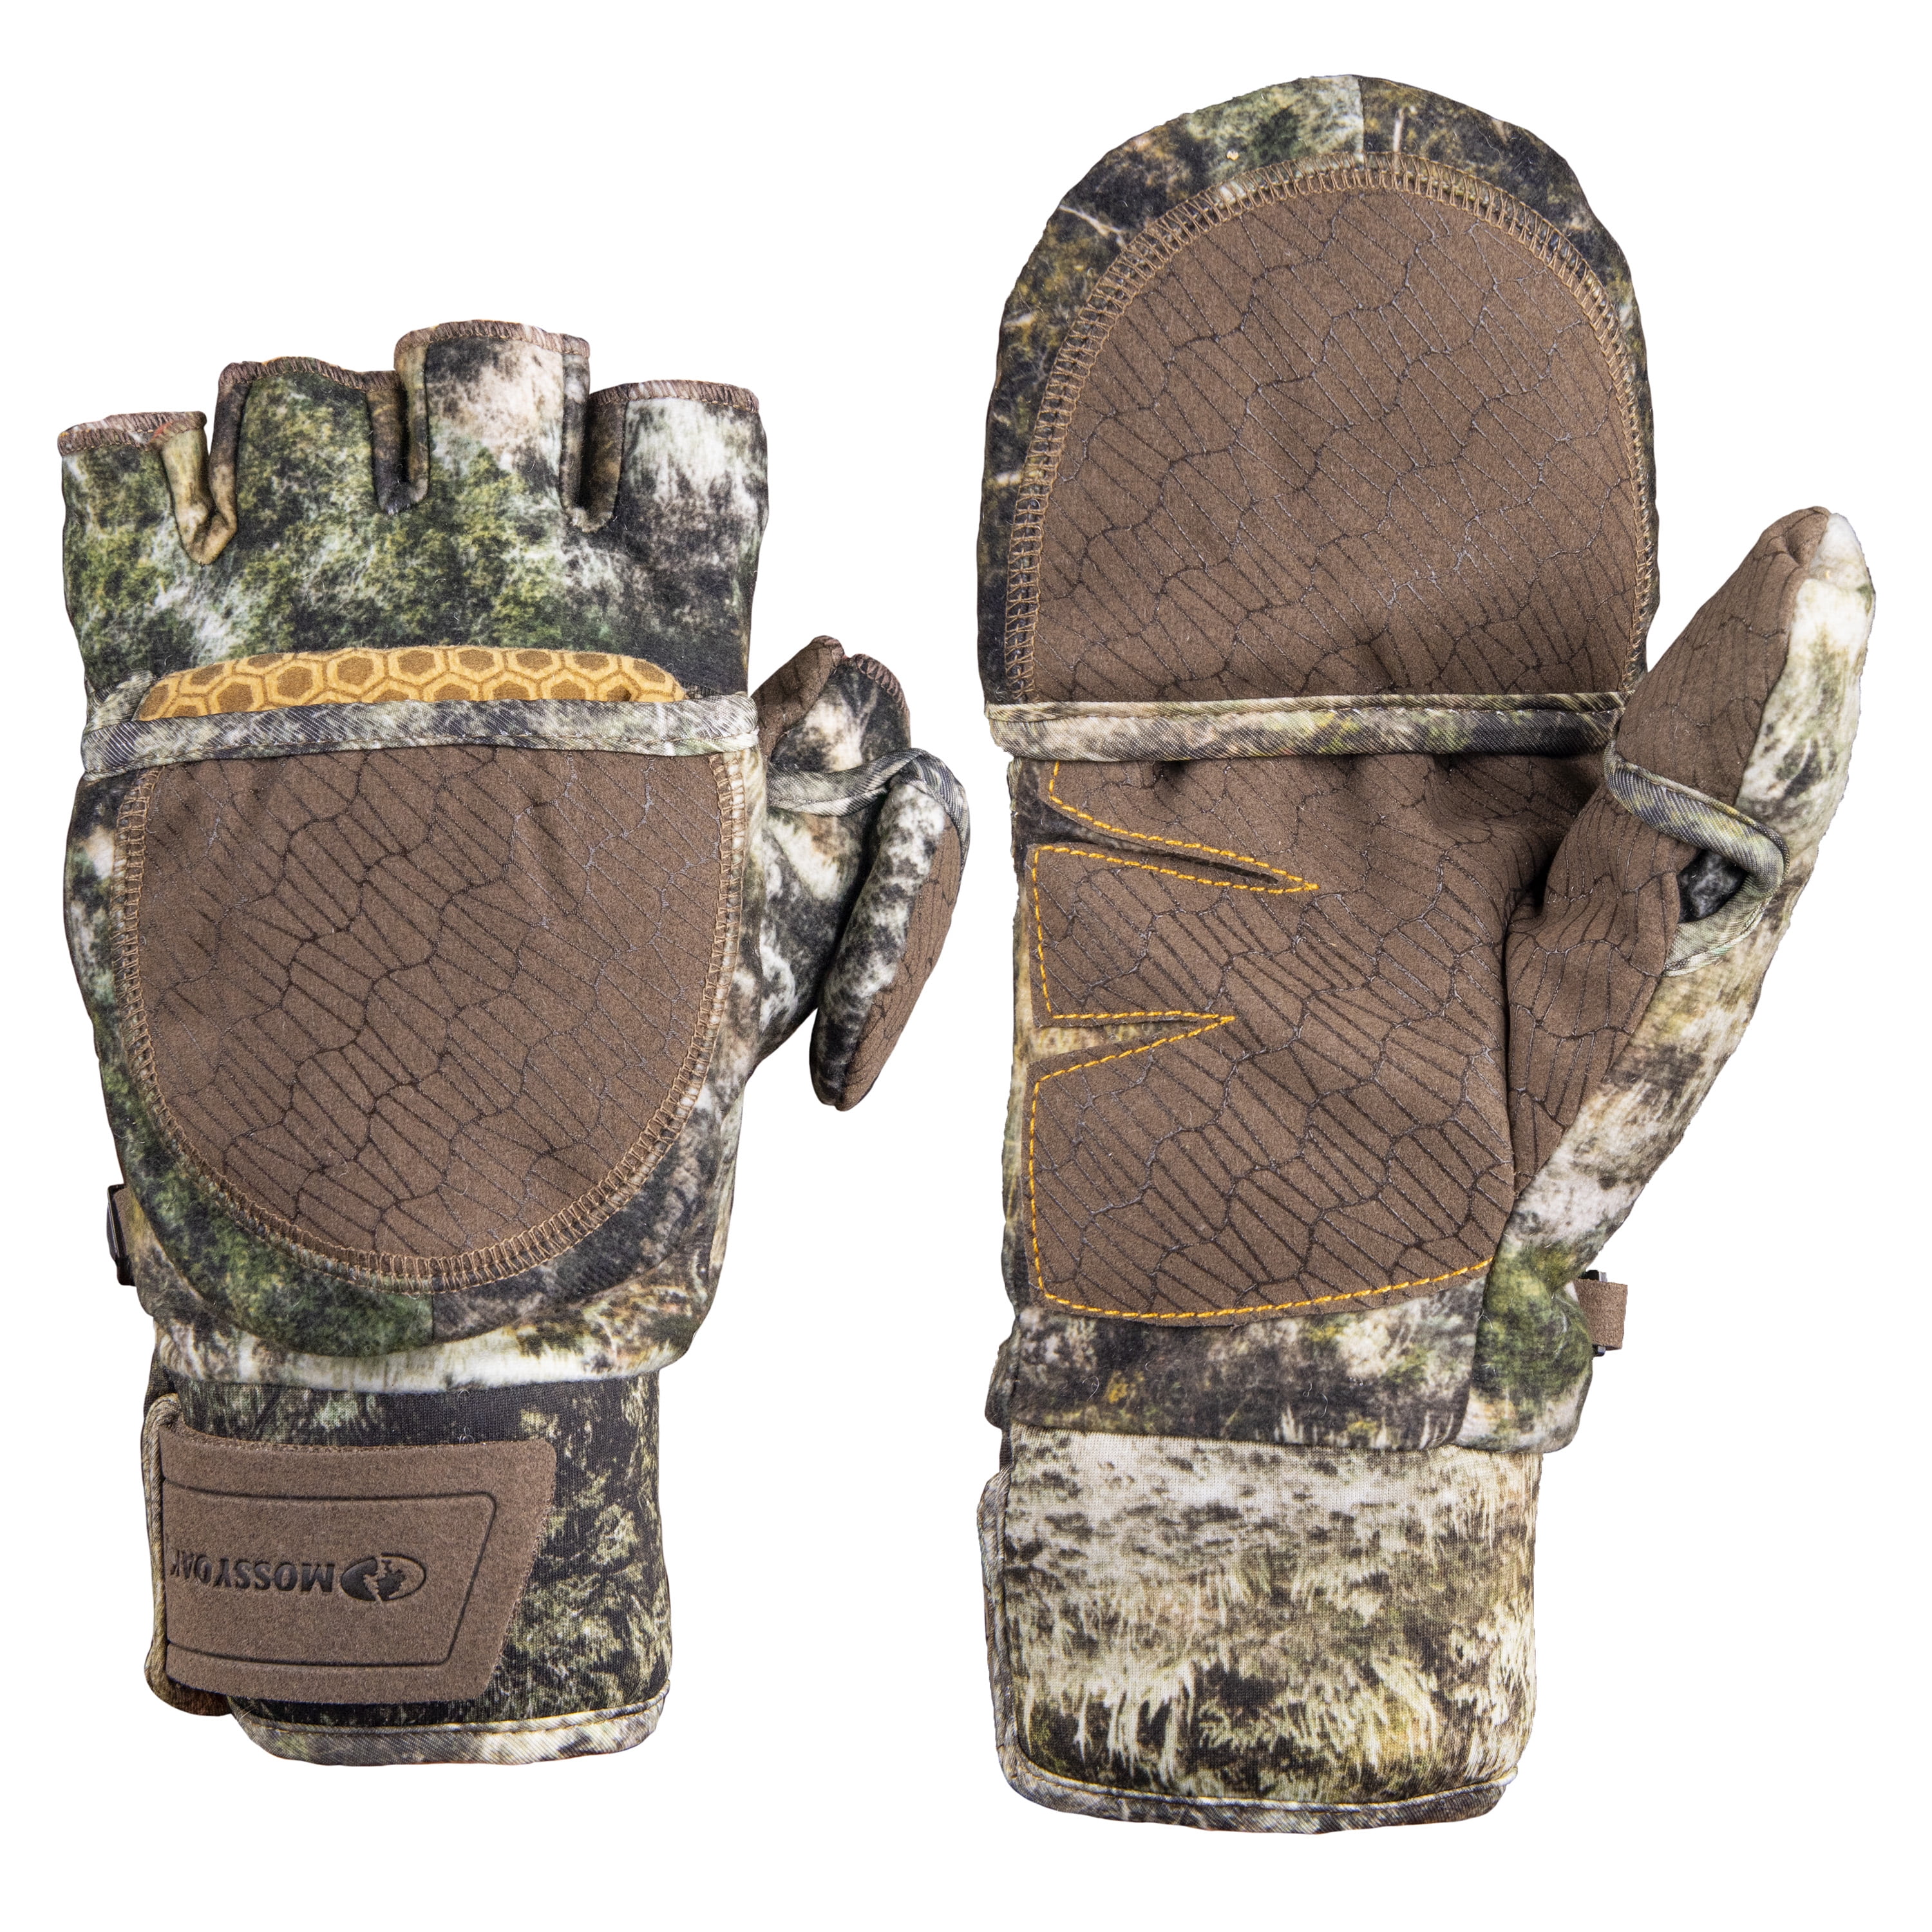 GREEN THINSULATE LINED THERMAL COLDWEATHER HUNTING GLOMITTS HUNTERS MITTENS MITT 